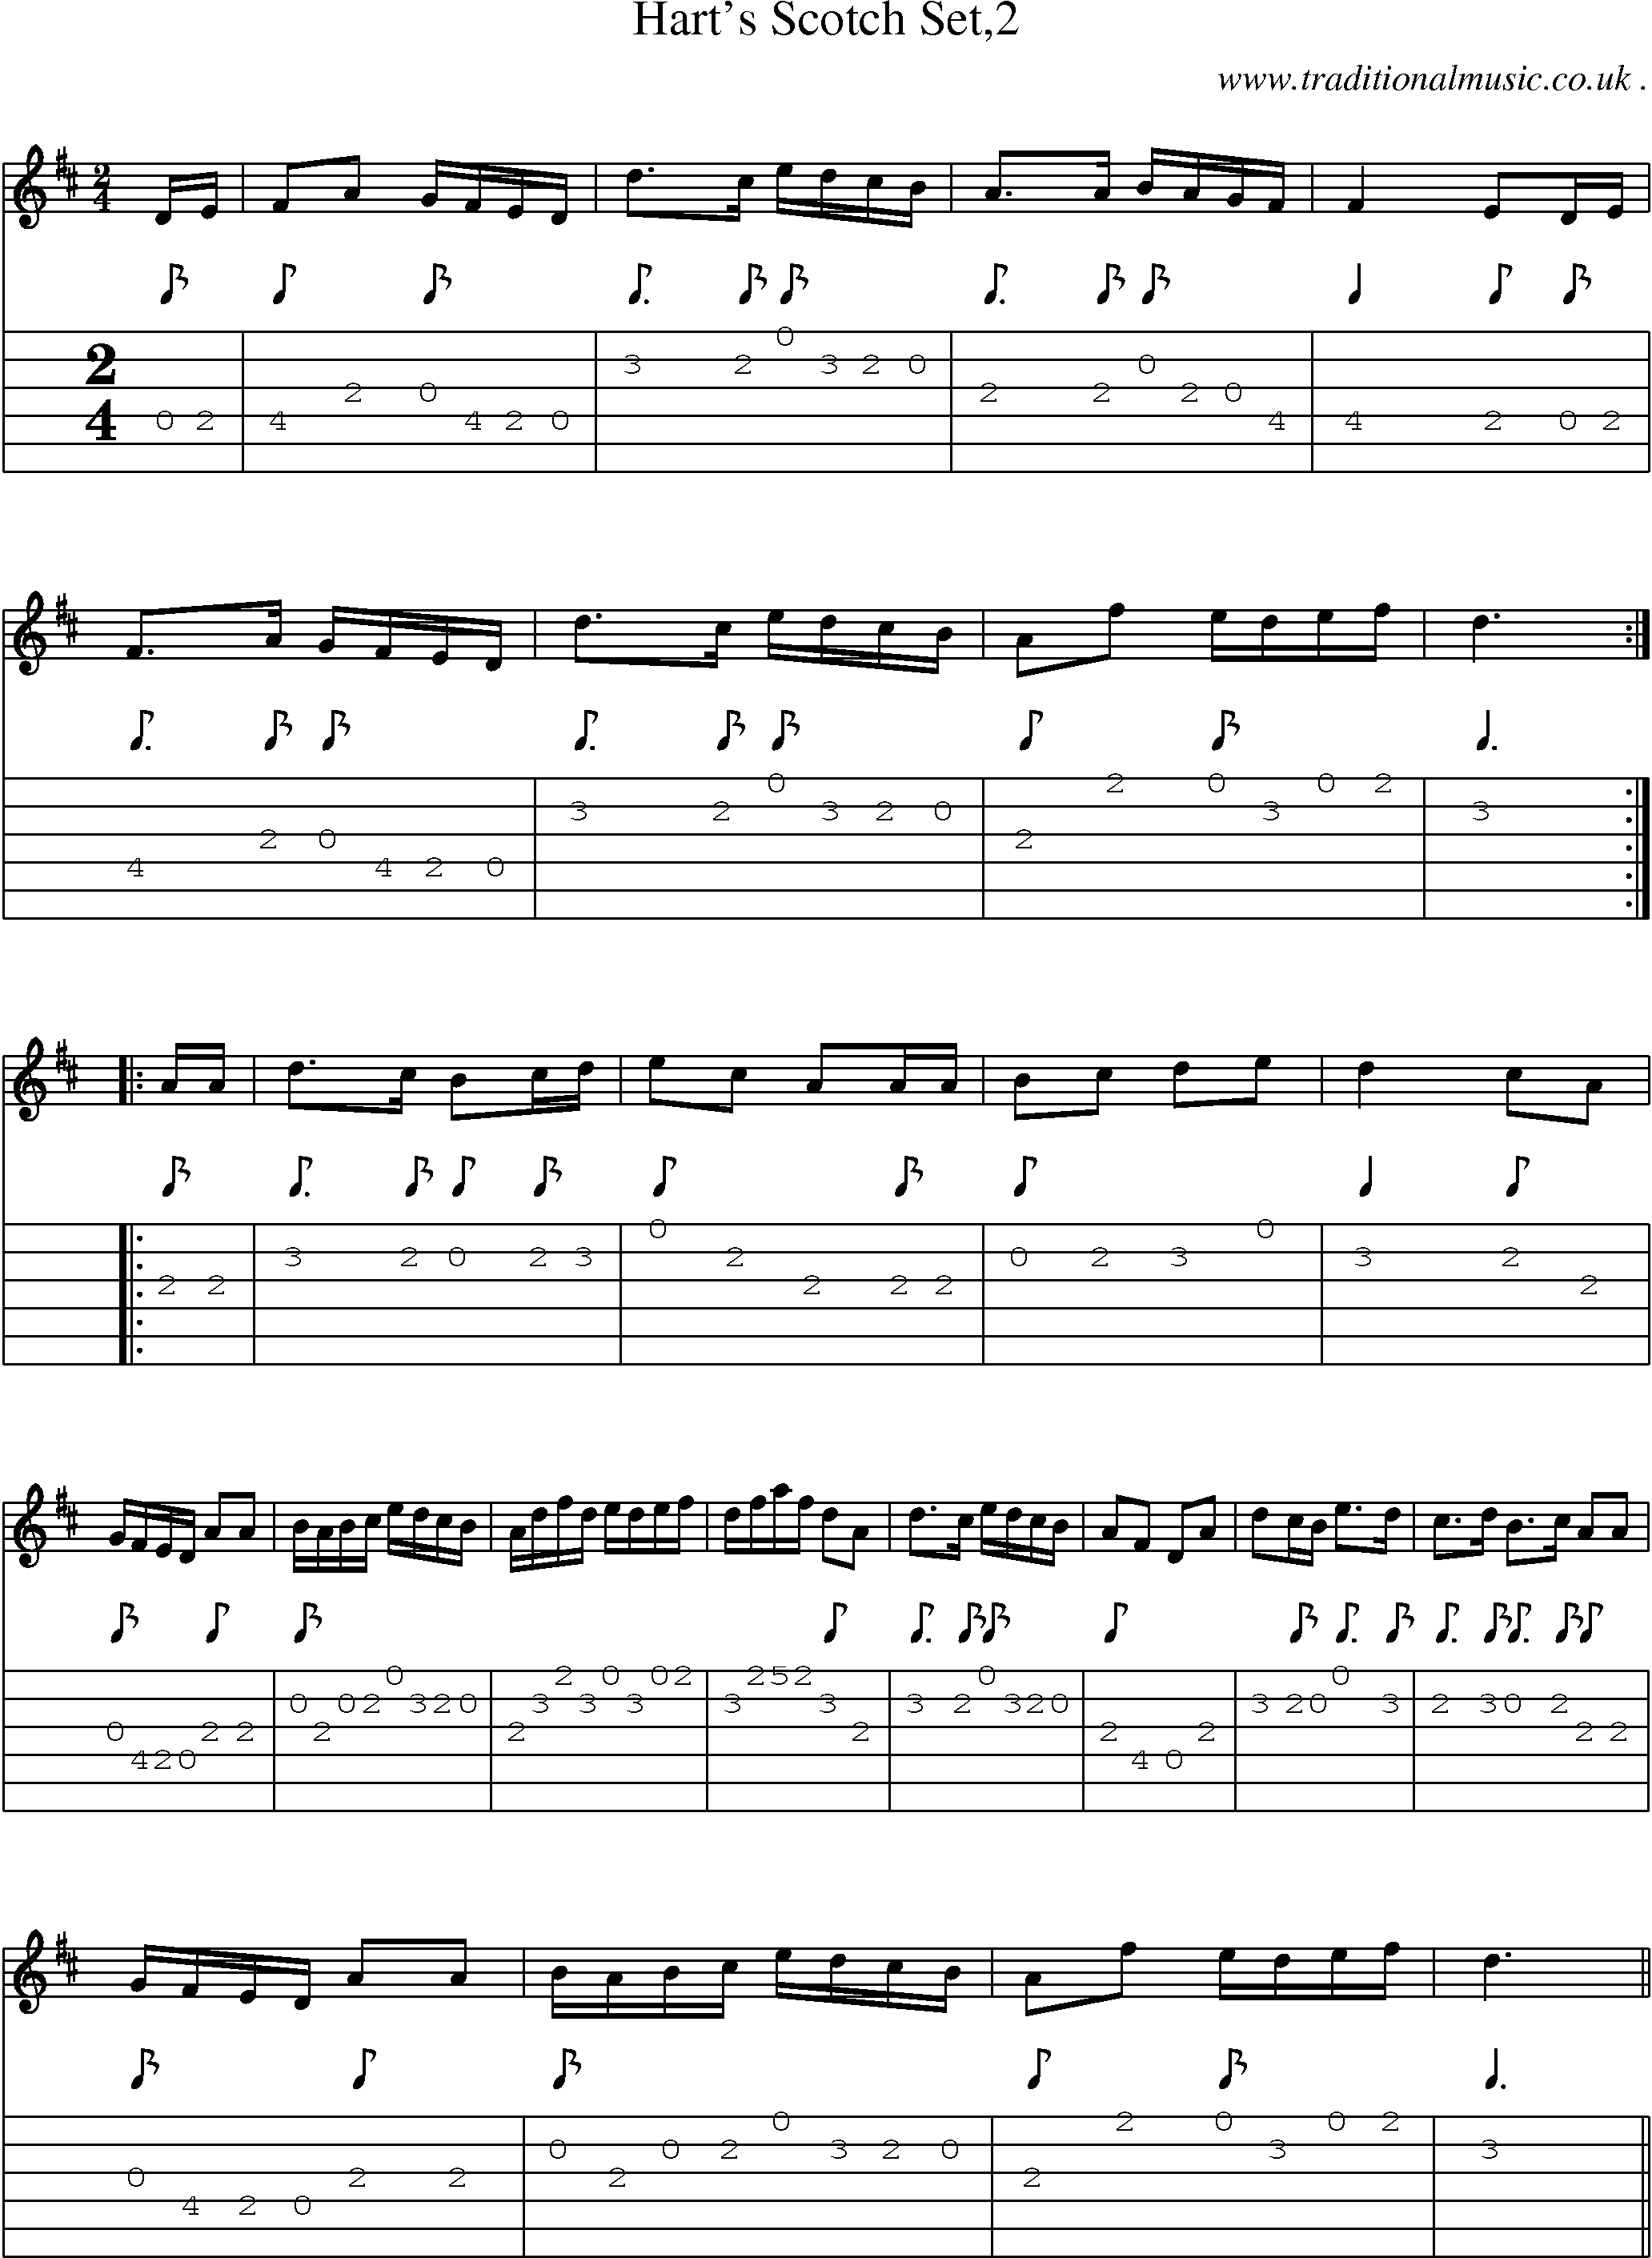 Sheet-Music and Guitar Tabs for Harts Scotch Set2